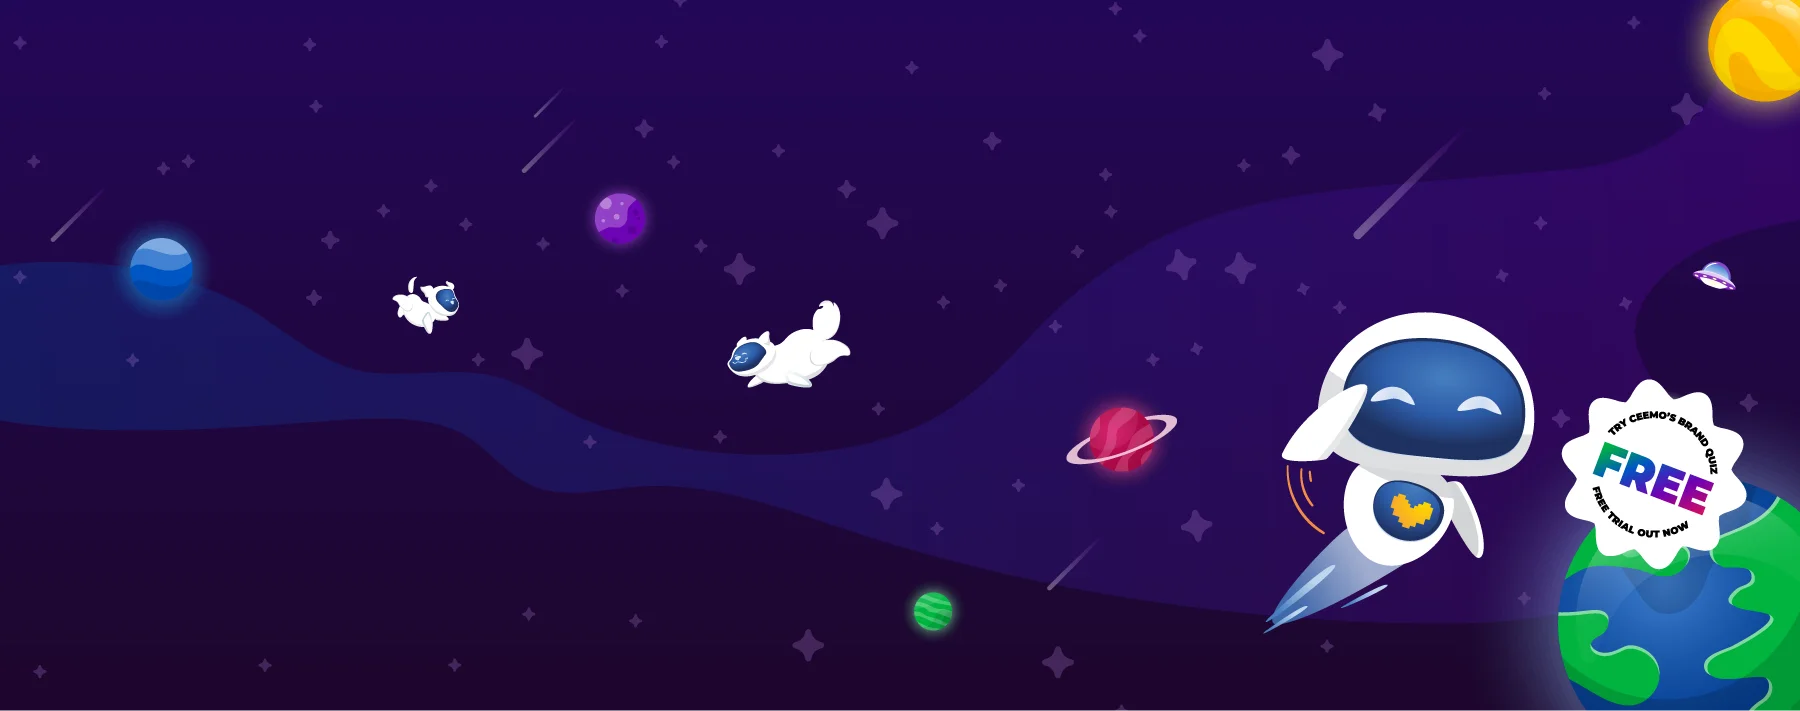 An illustrated space landscape, filled with stars, colorful planets, and shooting stars. Ceemo the robot is flying past the Earth, smiling & saluting at the viewer. His two robot dog friends are floating peacefully through space, chasing planets. There's a badge on the right that reads, "Try Ceemo's Brand Quiz FREE! Free trial out now."